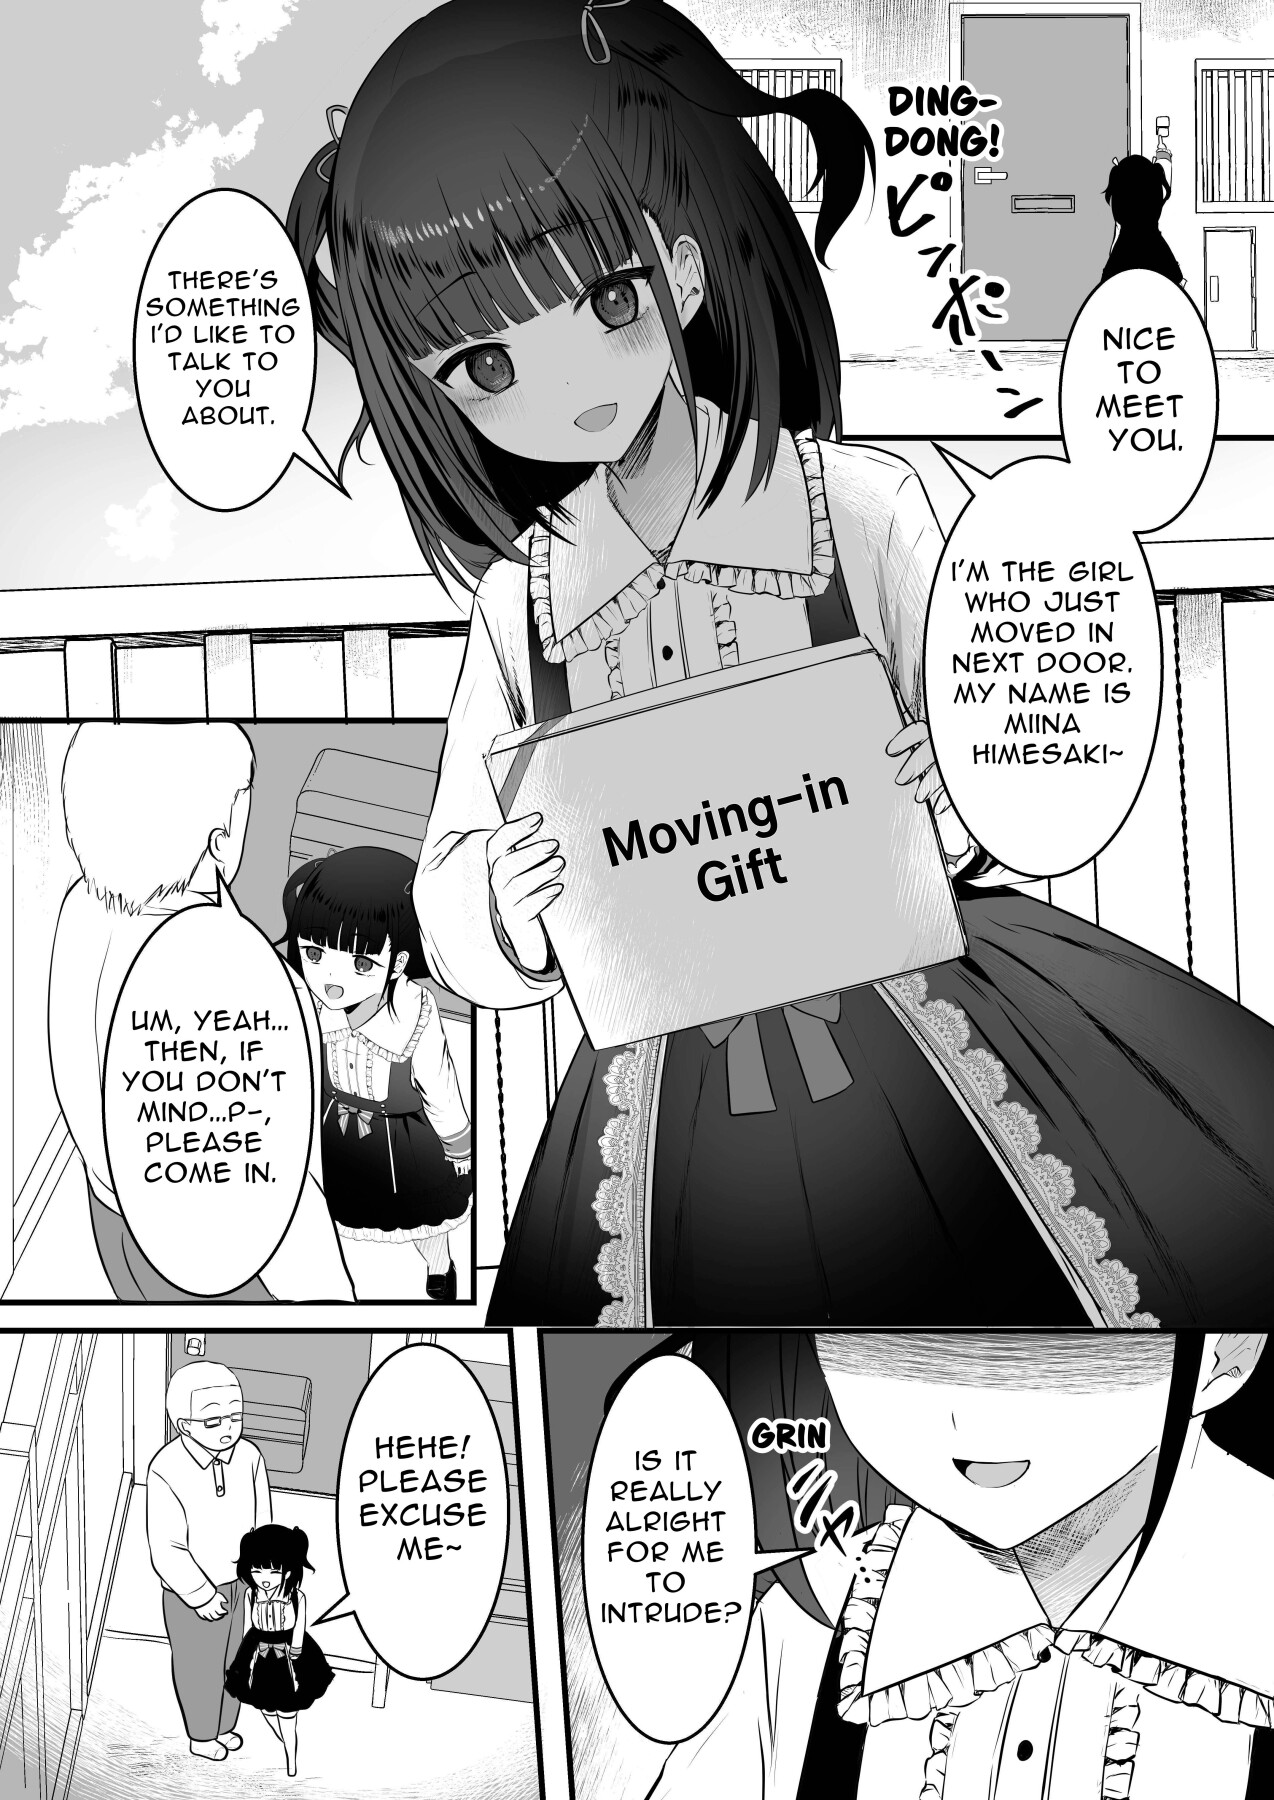 Hentai Manga Comic-A Female Brat Has Moved Into The House Next Door!-Read-2